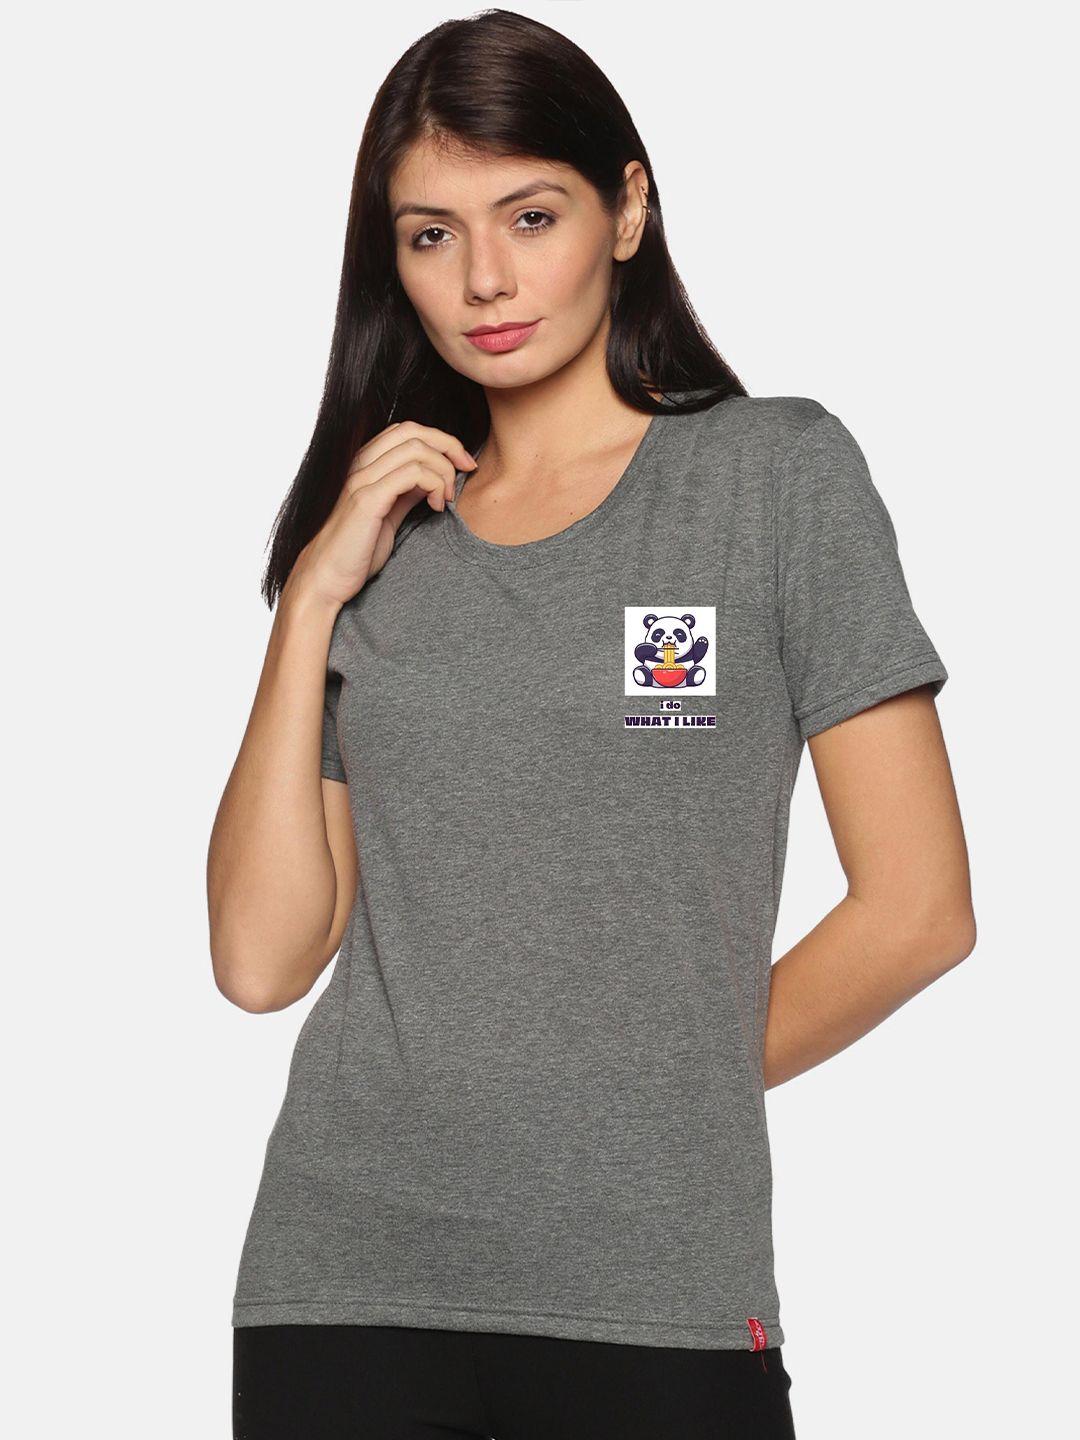 not-yet-by-us-women-grey-round-neck-t-shirt